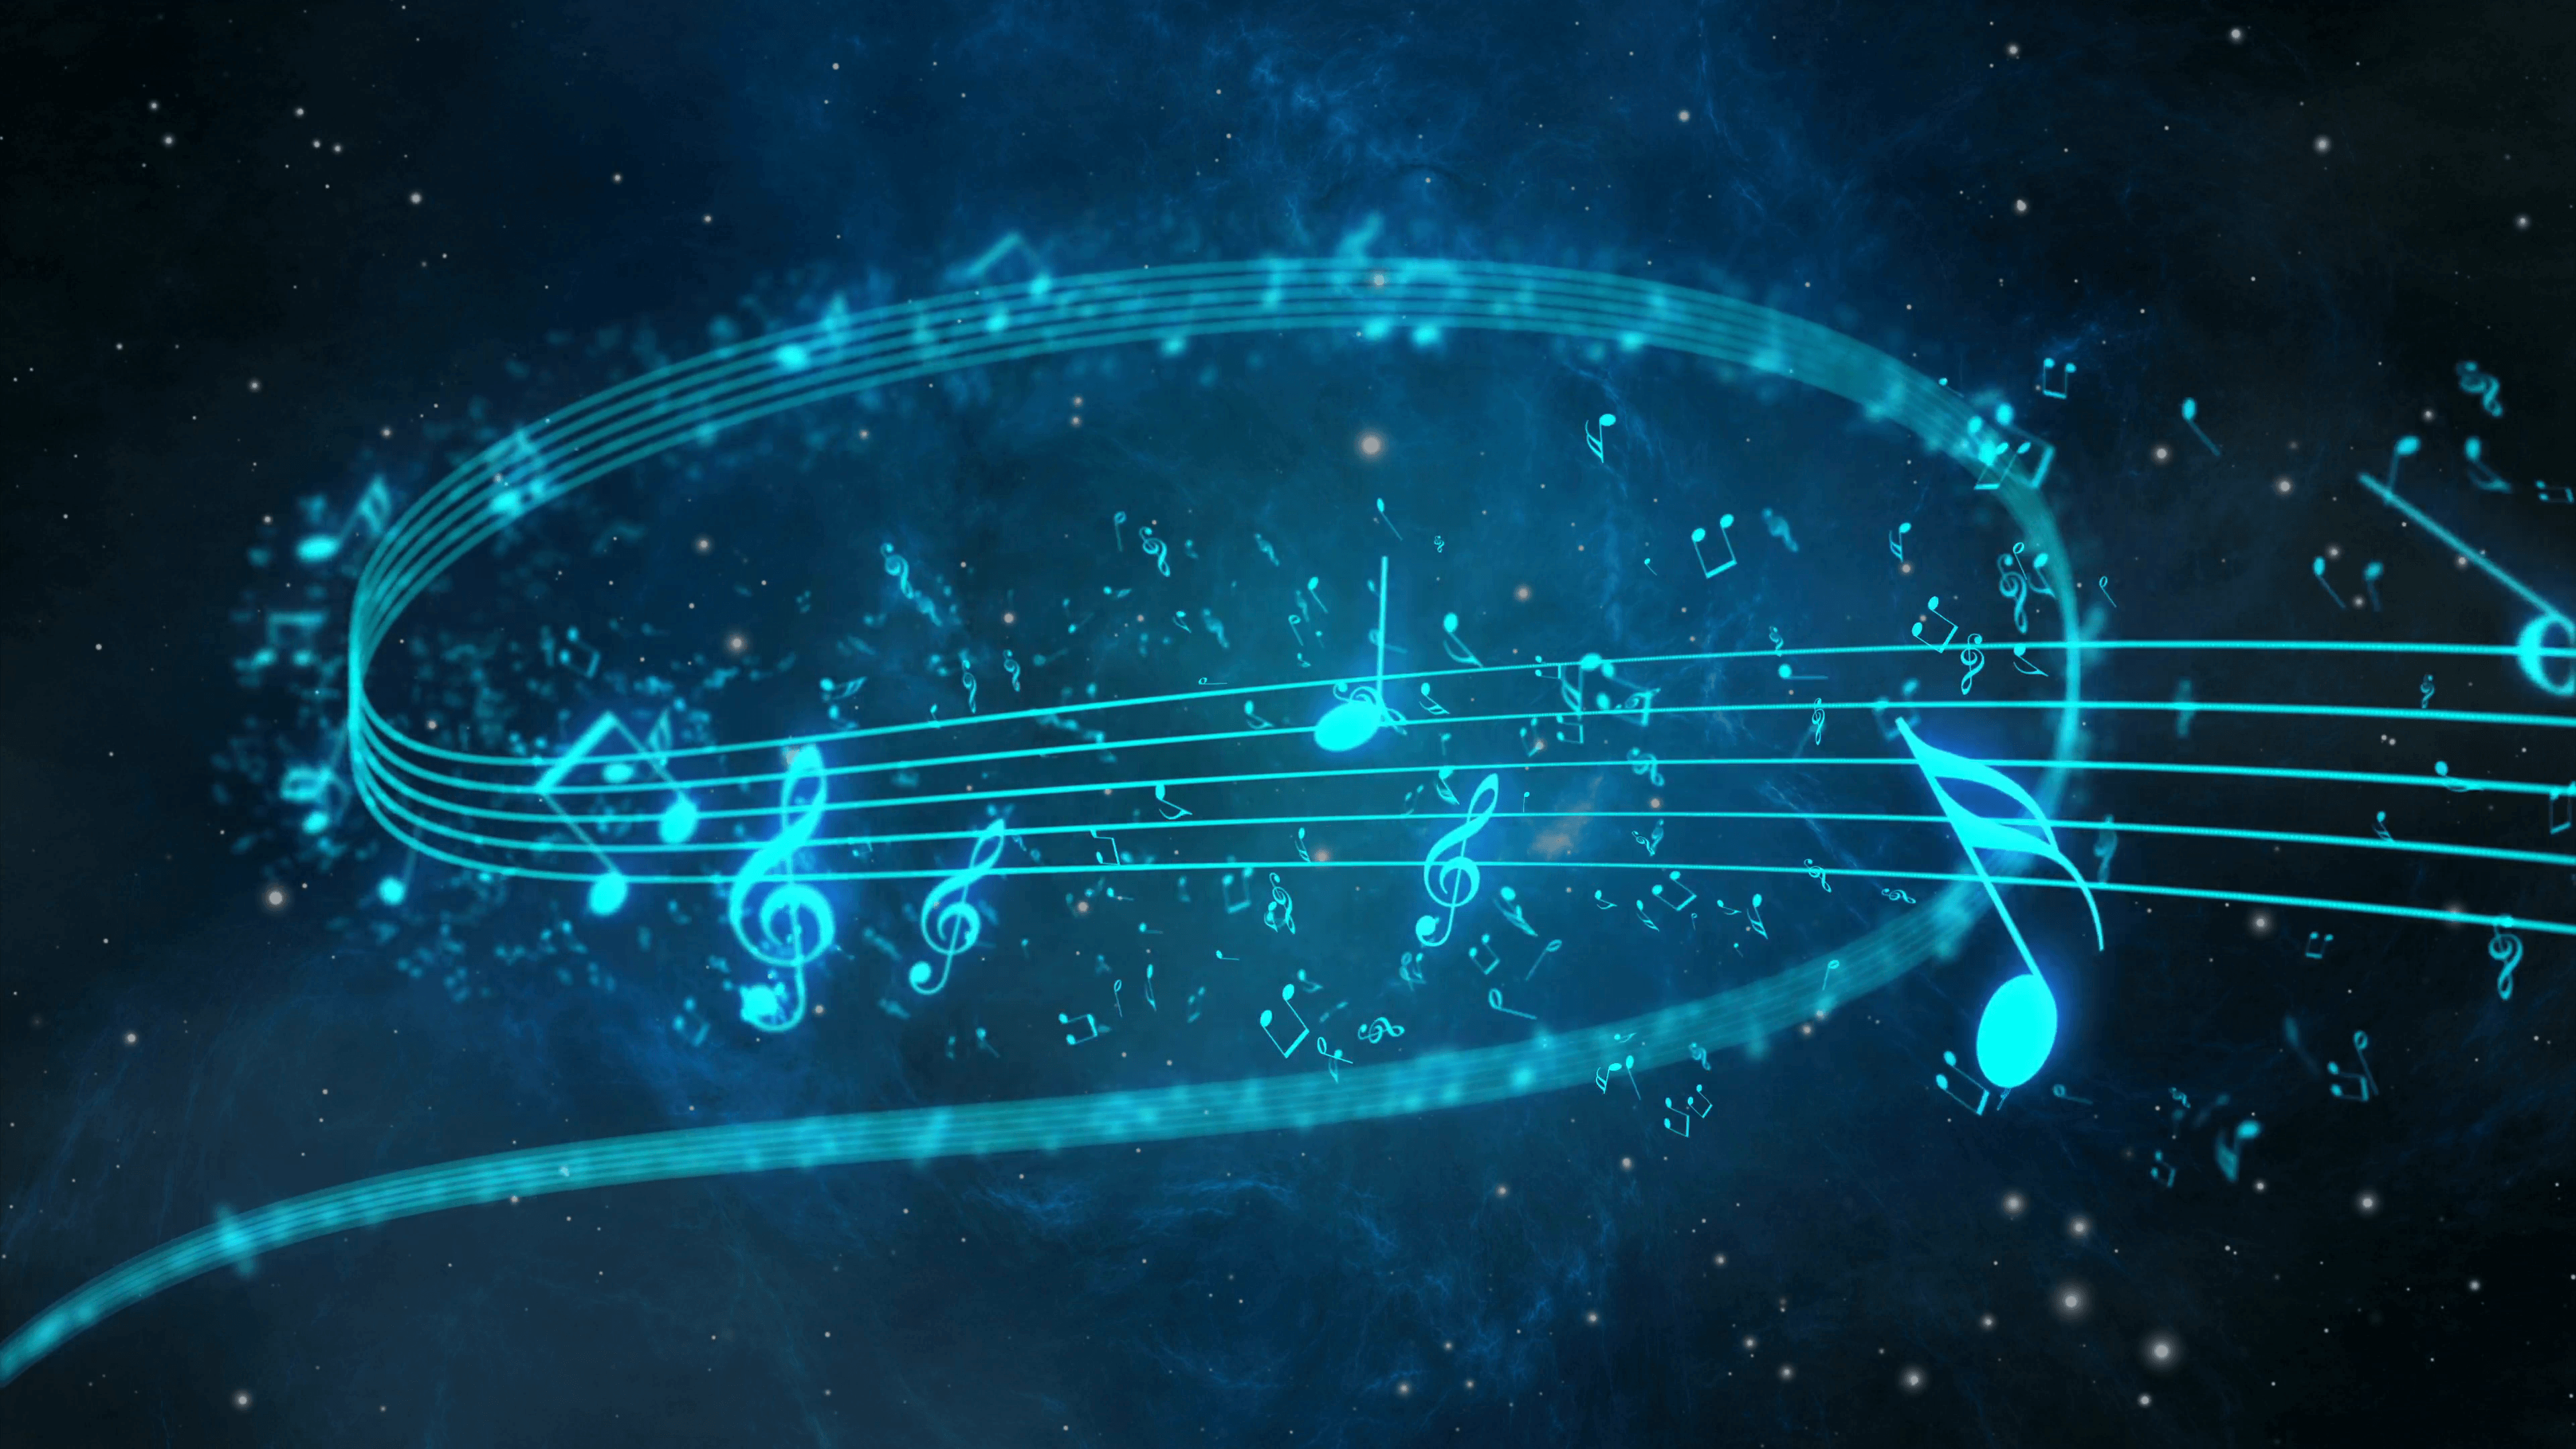 Animated background with musical notes, Music notes flowing